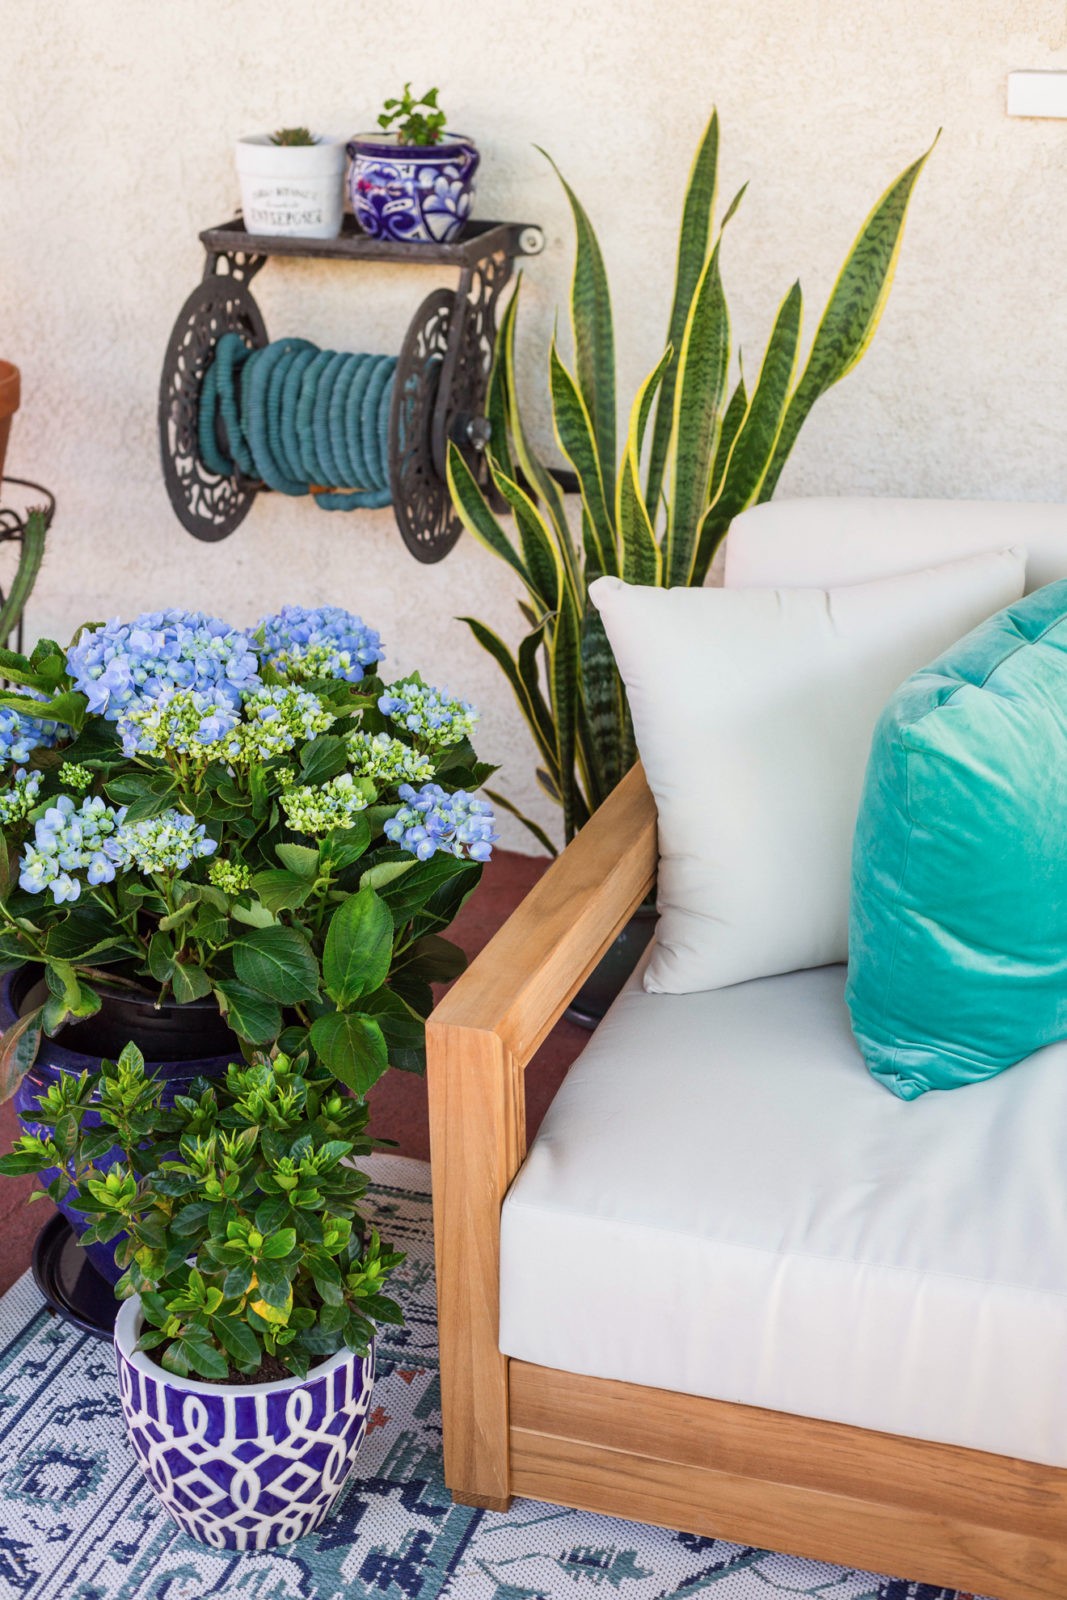 5 Decorations That You Need For Your Summer Soiree,Patio Decor Ideas with Bed Bath & Beyond by Home Decor Blogger Laura Lily, Patio Planter Ideas,